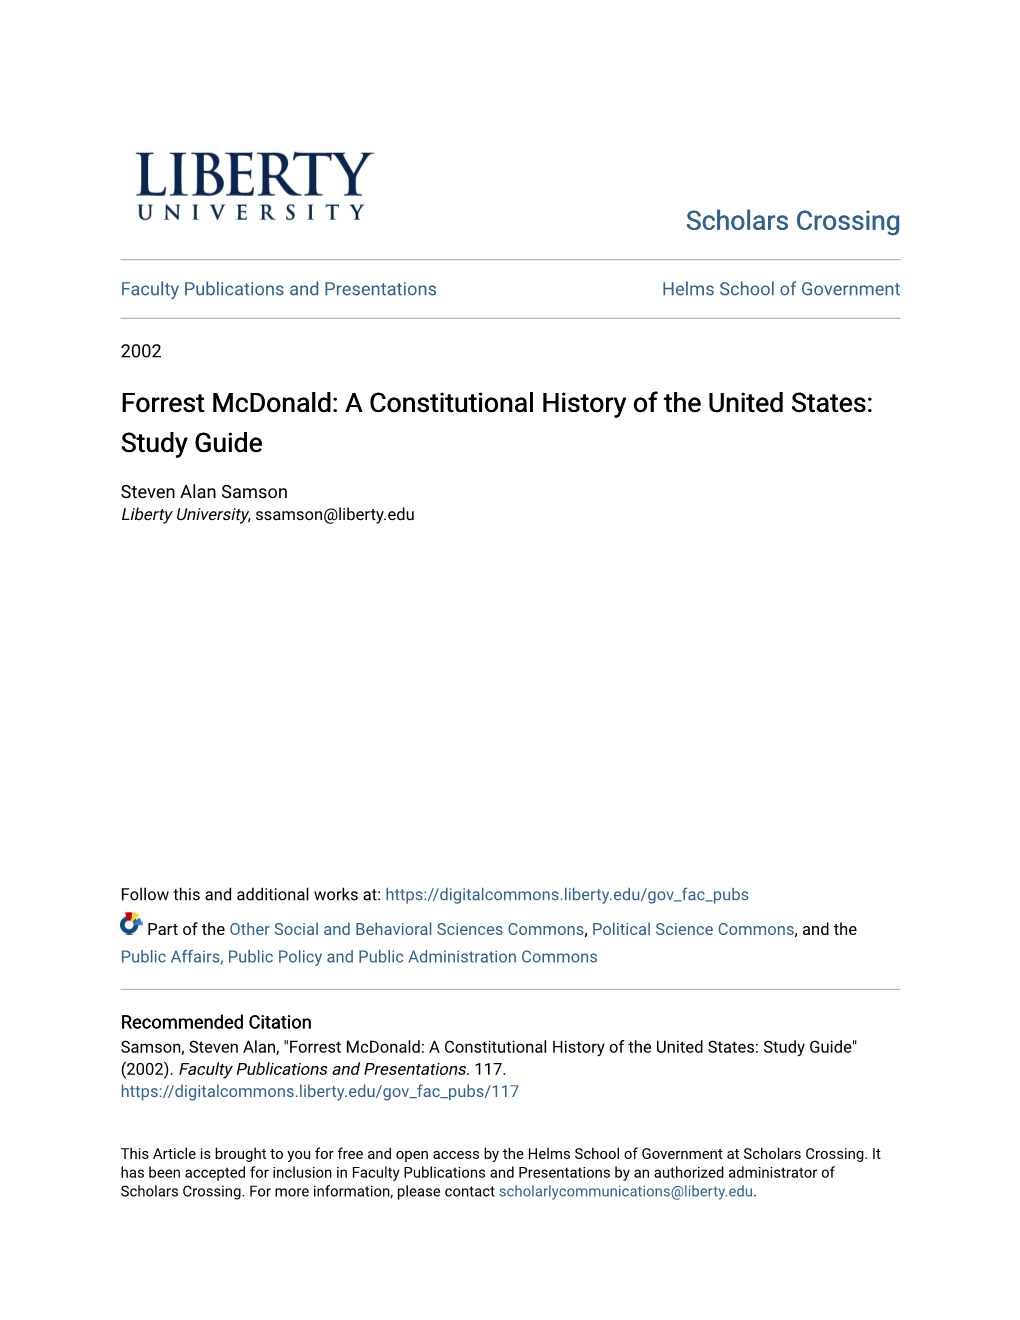 Forrest Mcdonald: a Constitutional History of the United States: Study Guide